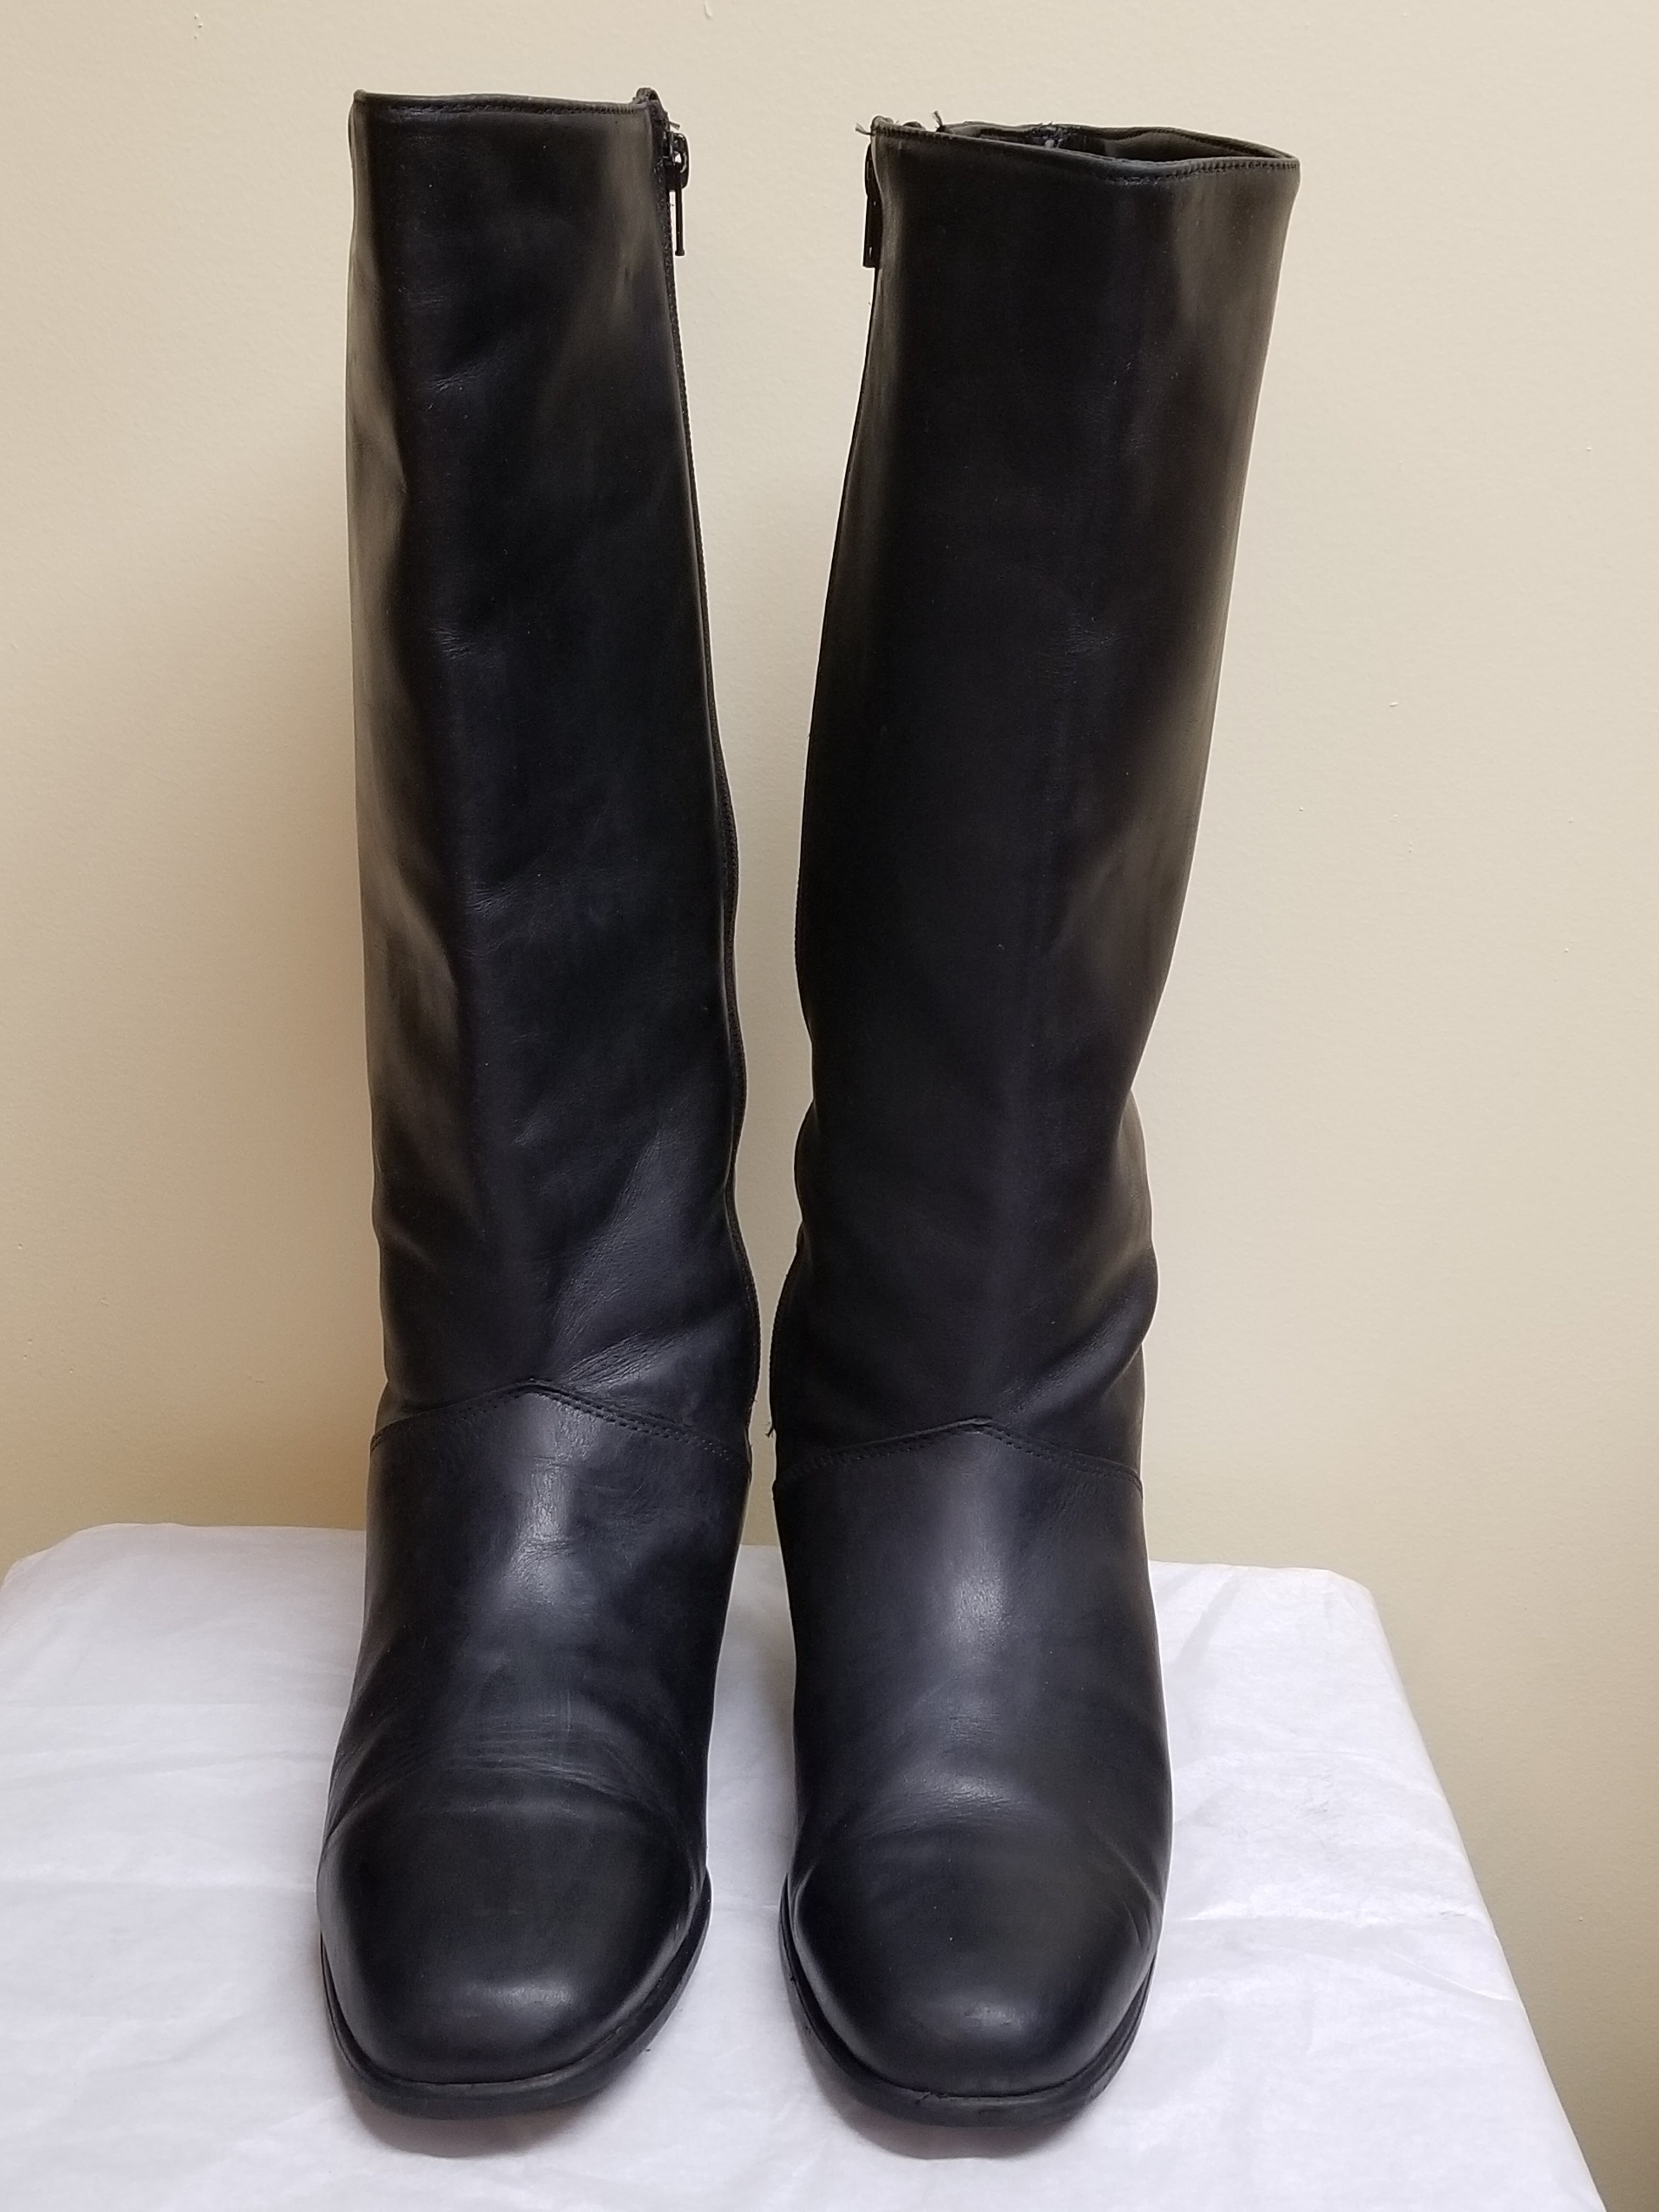 black leather boots size 11